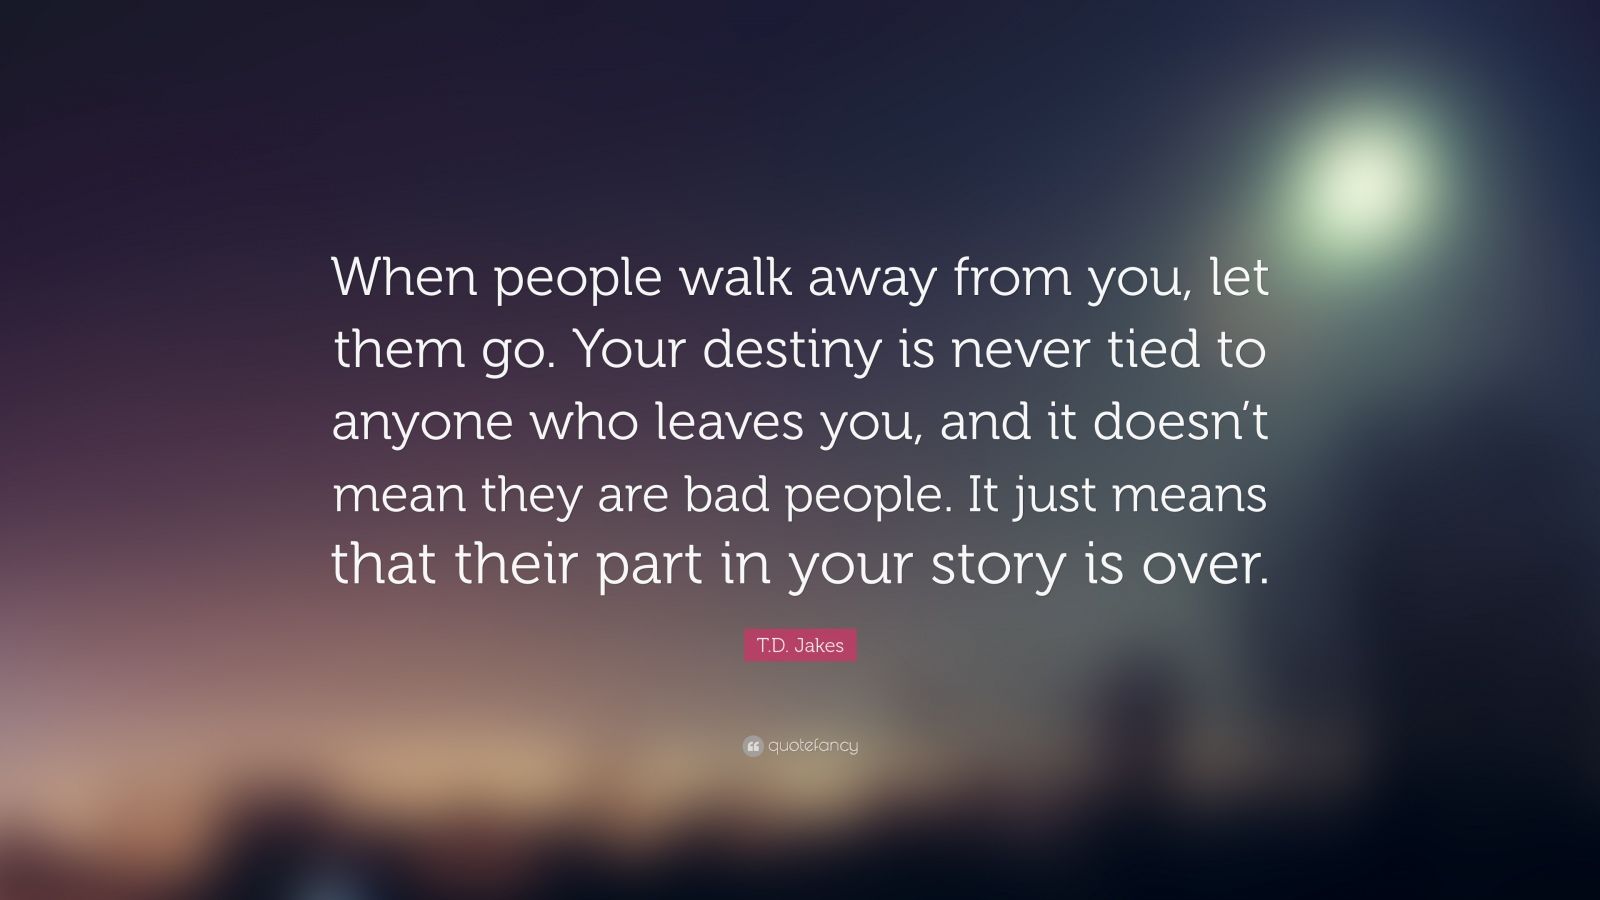 T.D. Jakes Quote “When people walk away from you, let